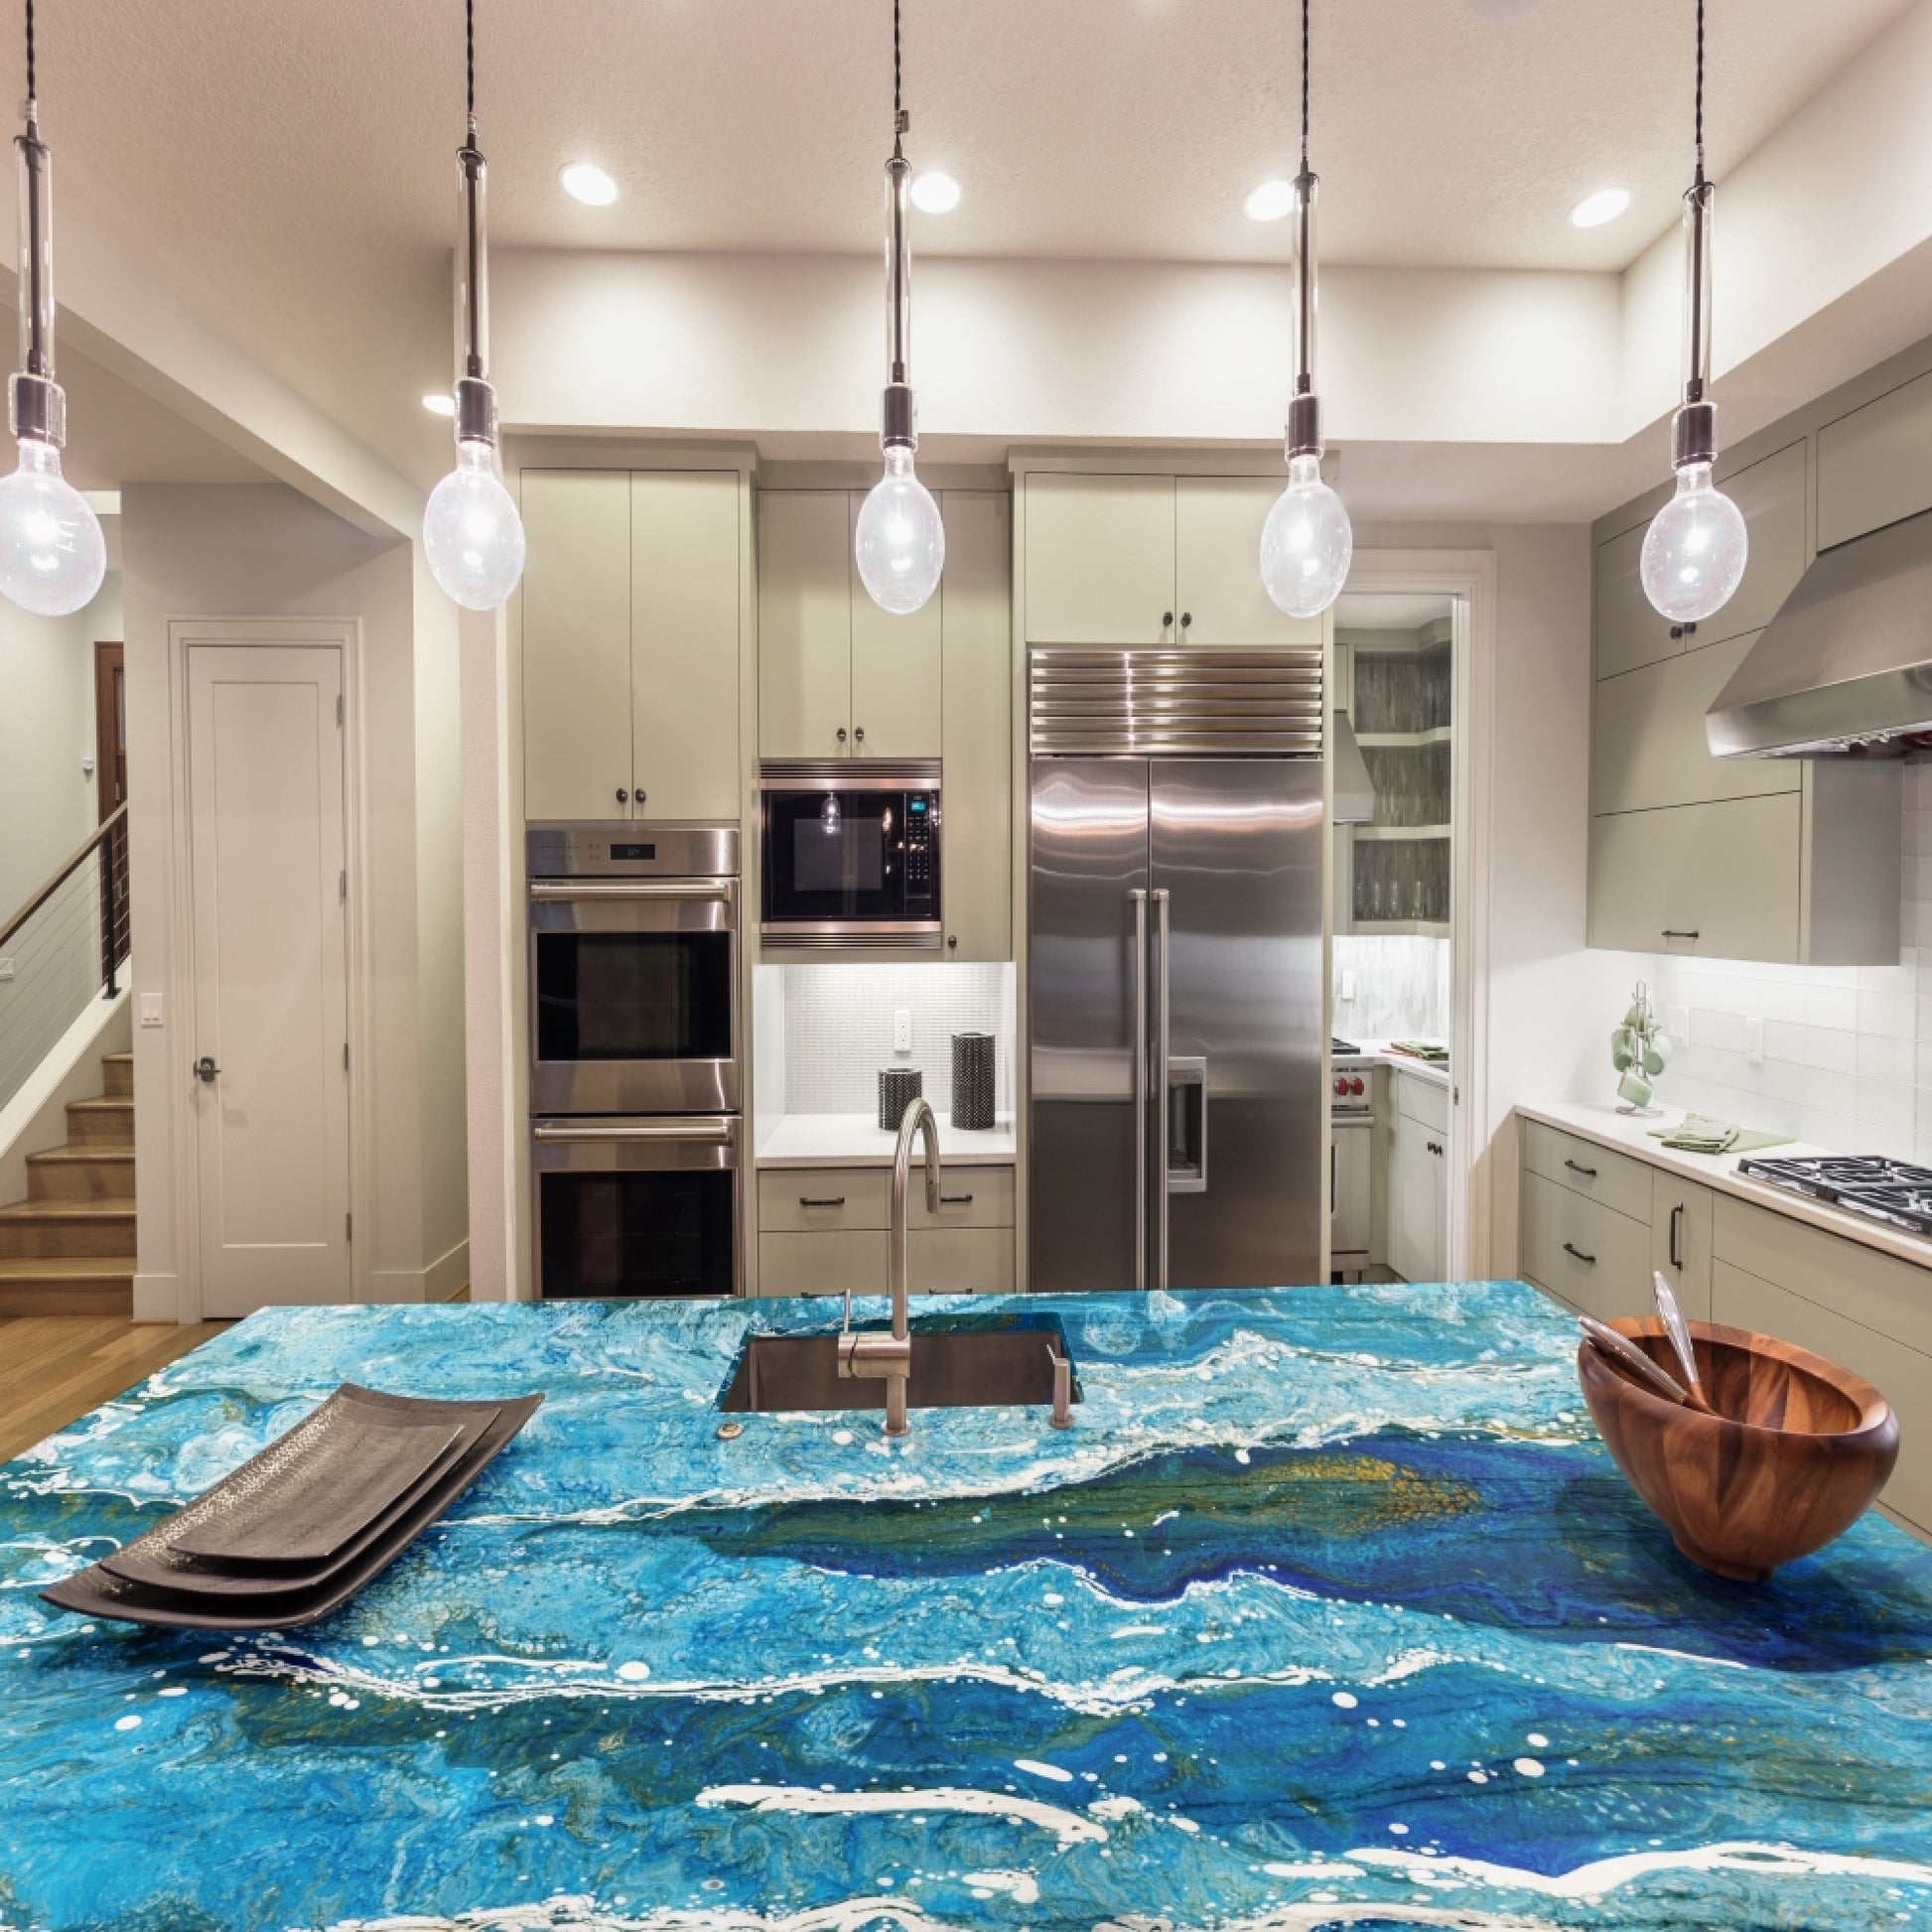 Change the Look of Dated Countertops - Resin Expression's Solution